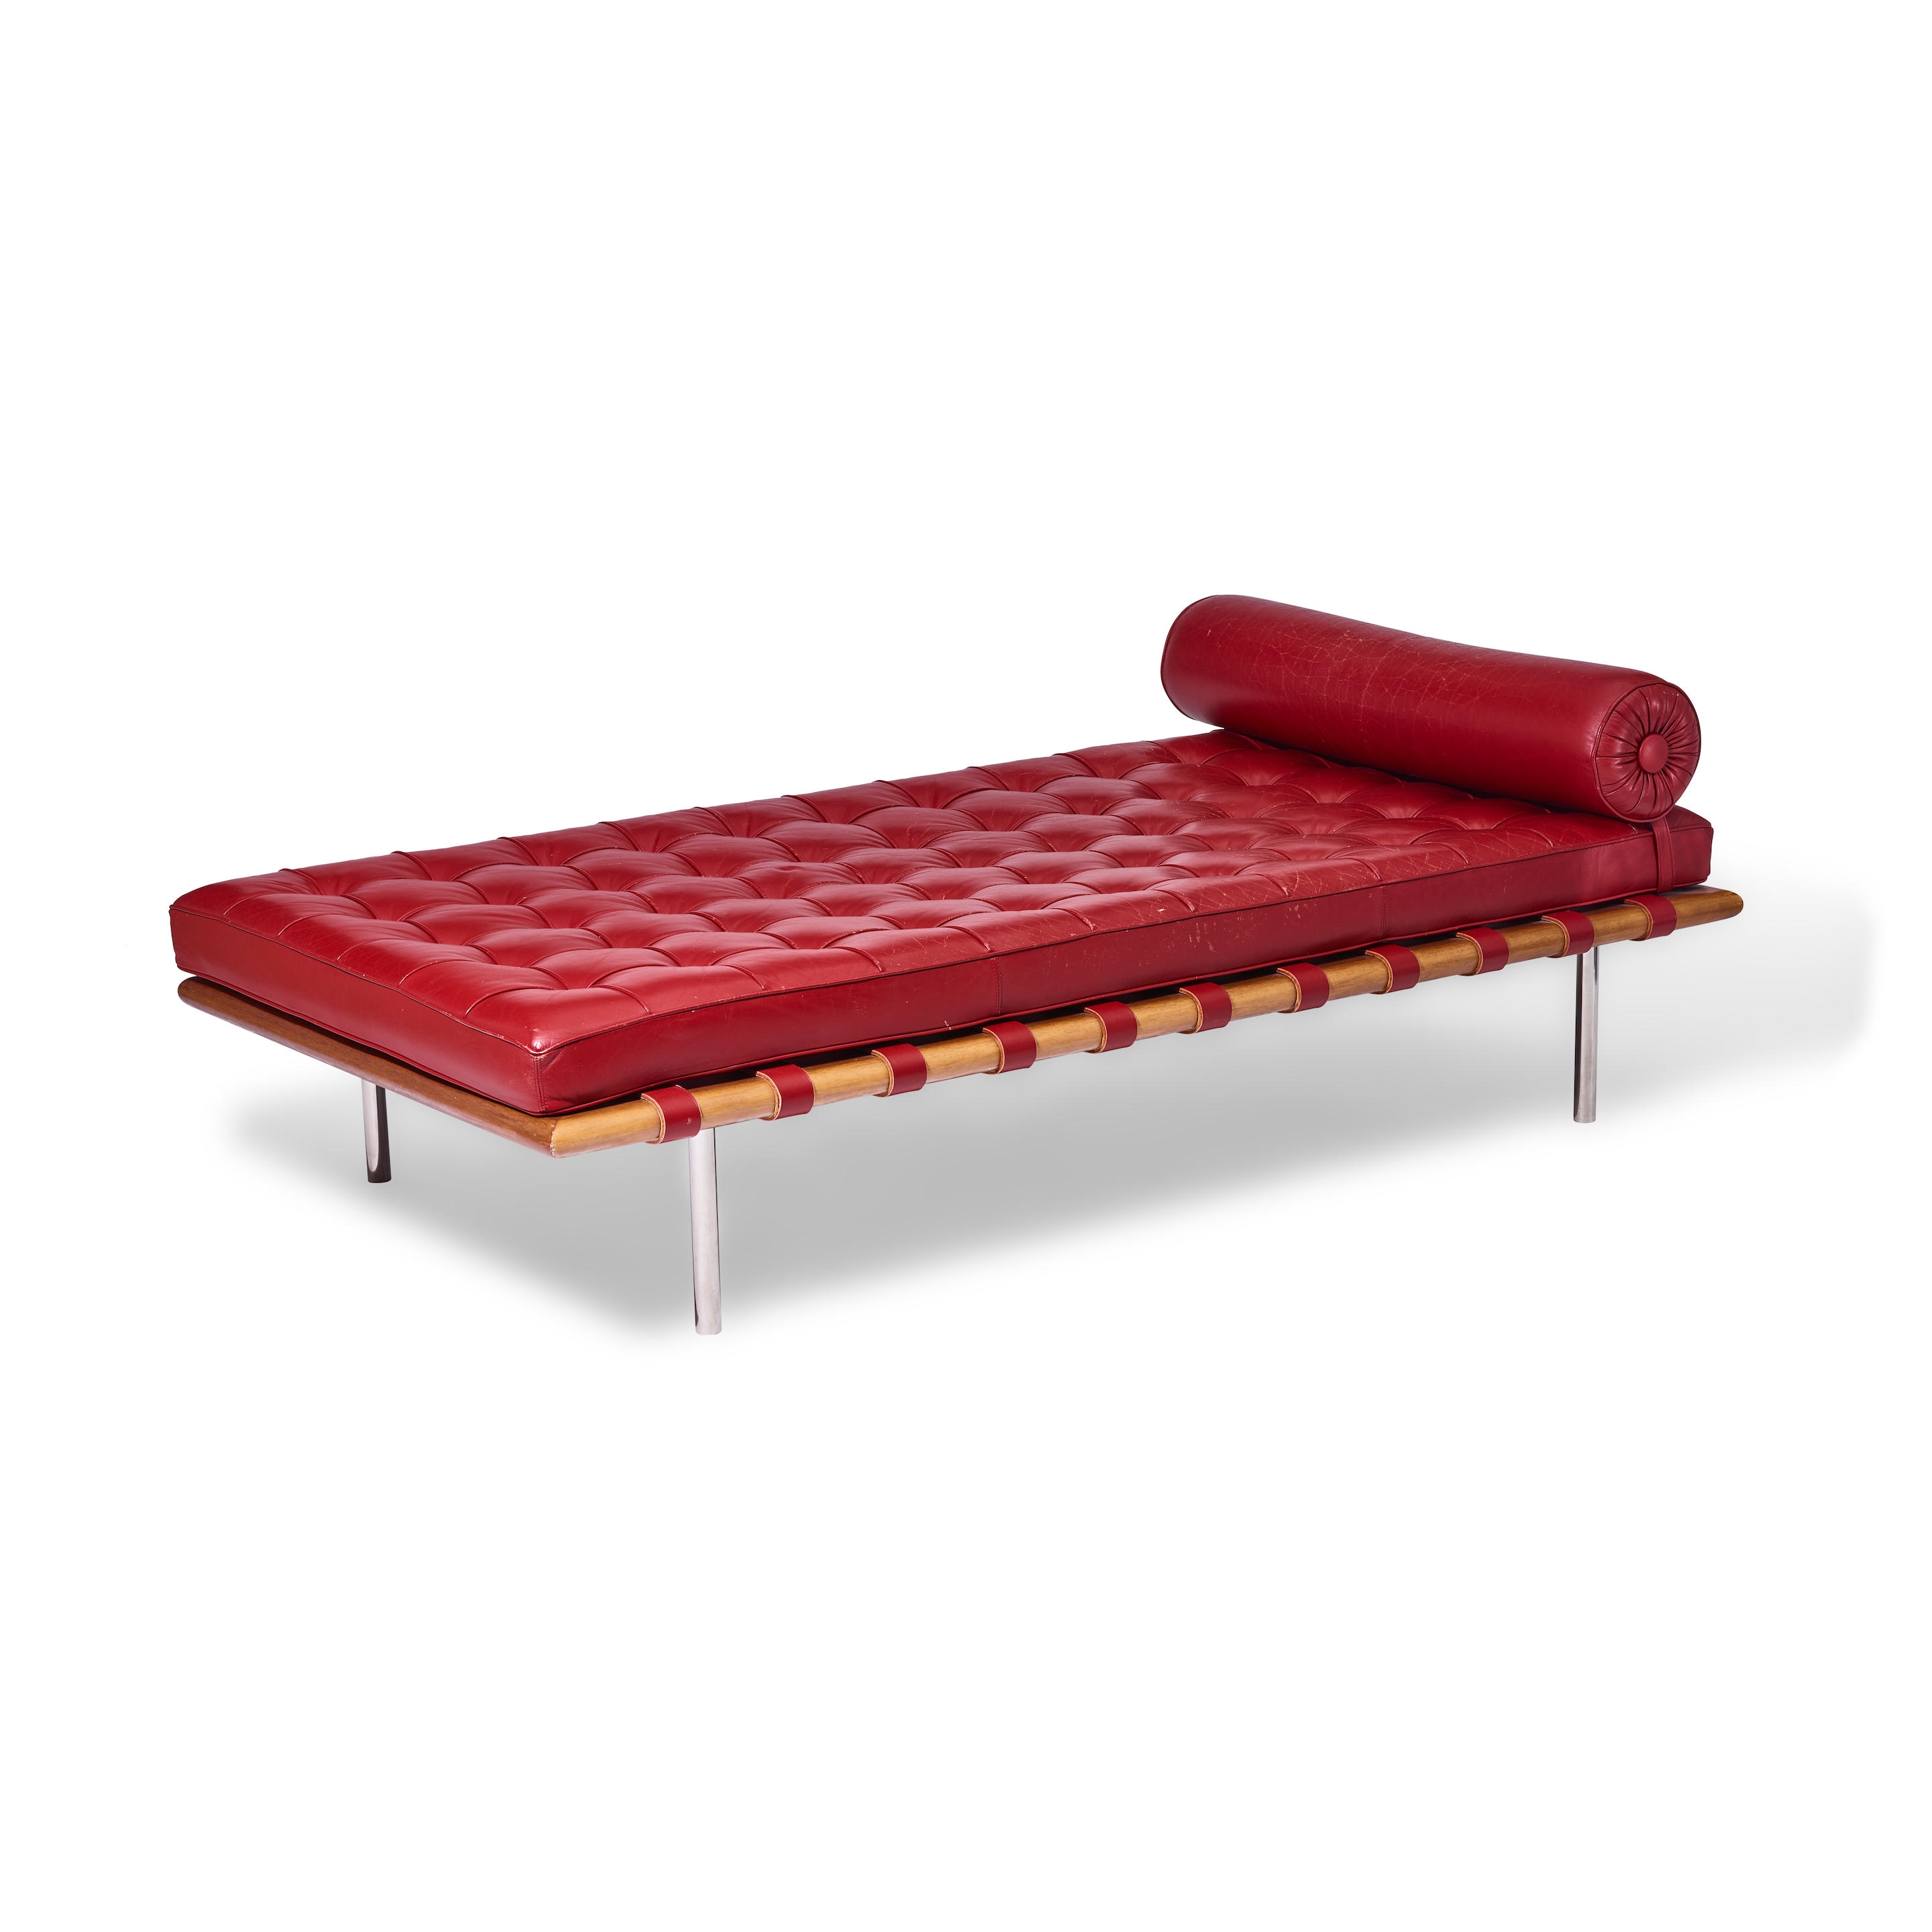 Artwork by Ludwig Mies van der Rohe, Barcelona Daybed, Made of walnut, leather, stainless steel